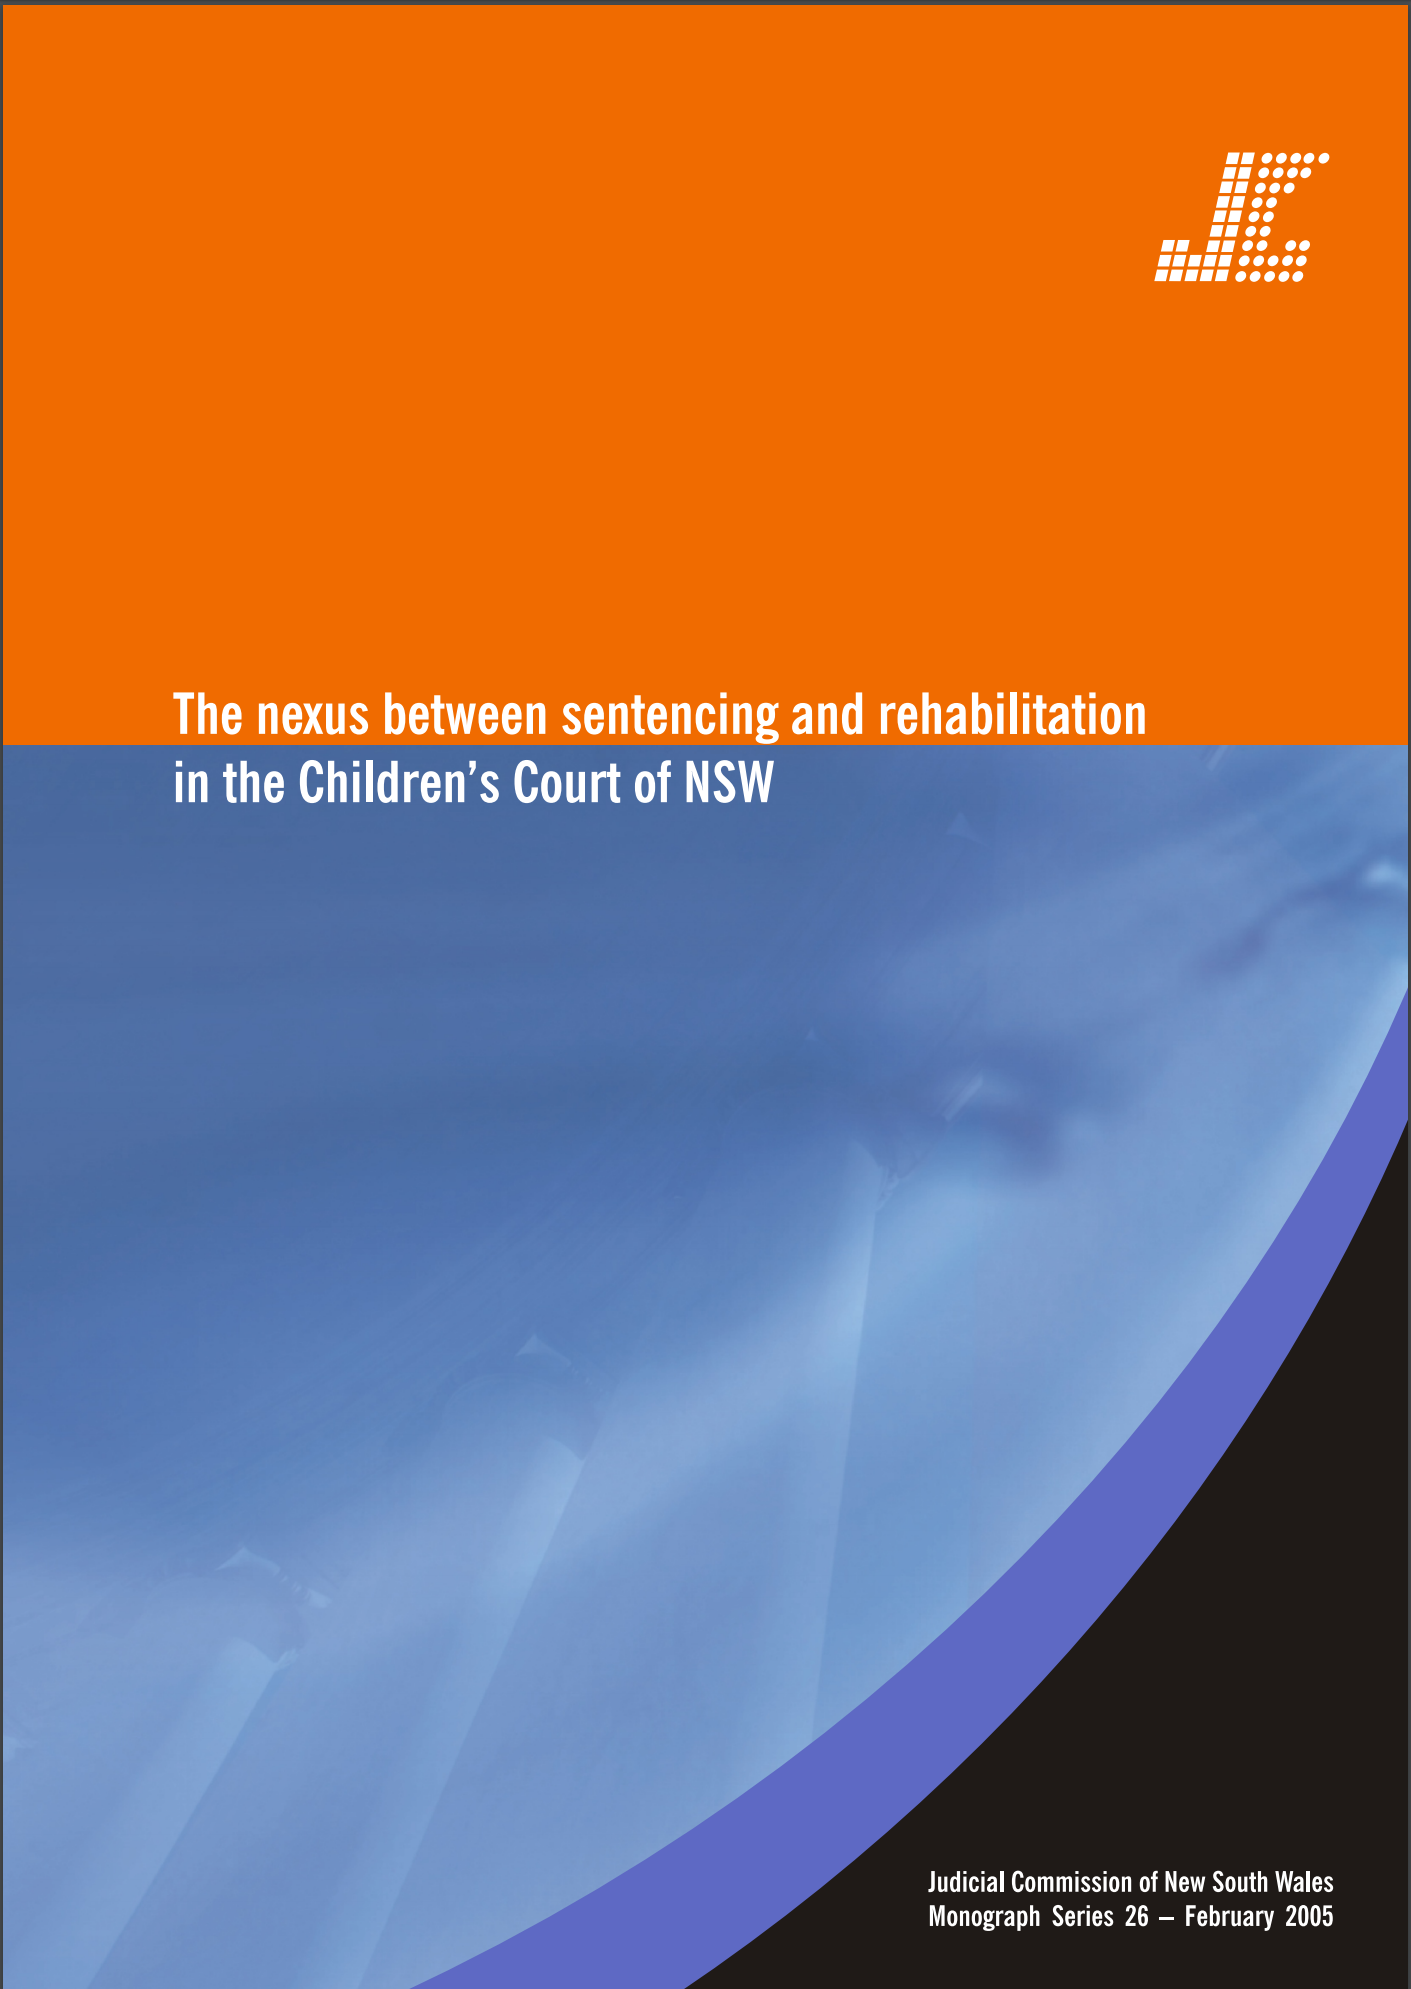 Research Monograph 26 Cover - The Nexus between Sentencing and Rehabilitation in the Children's Court of NSW